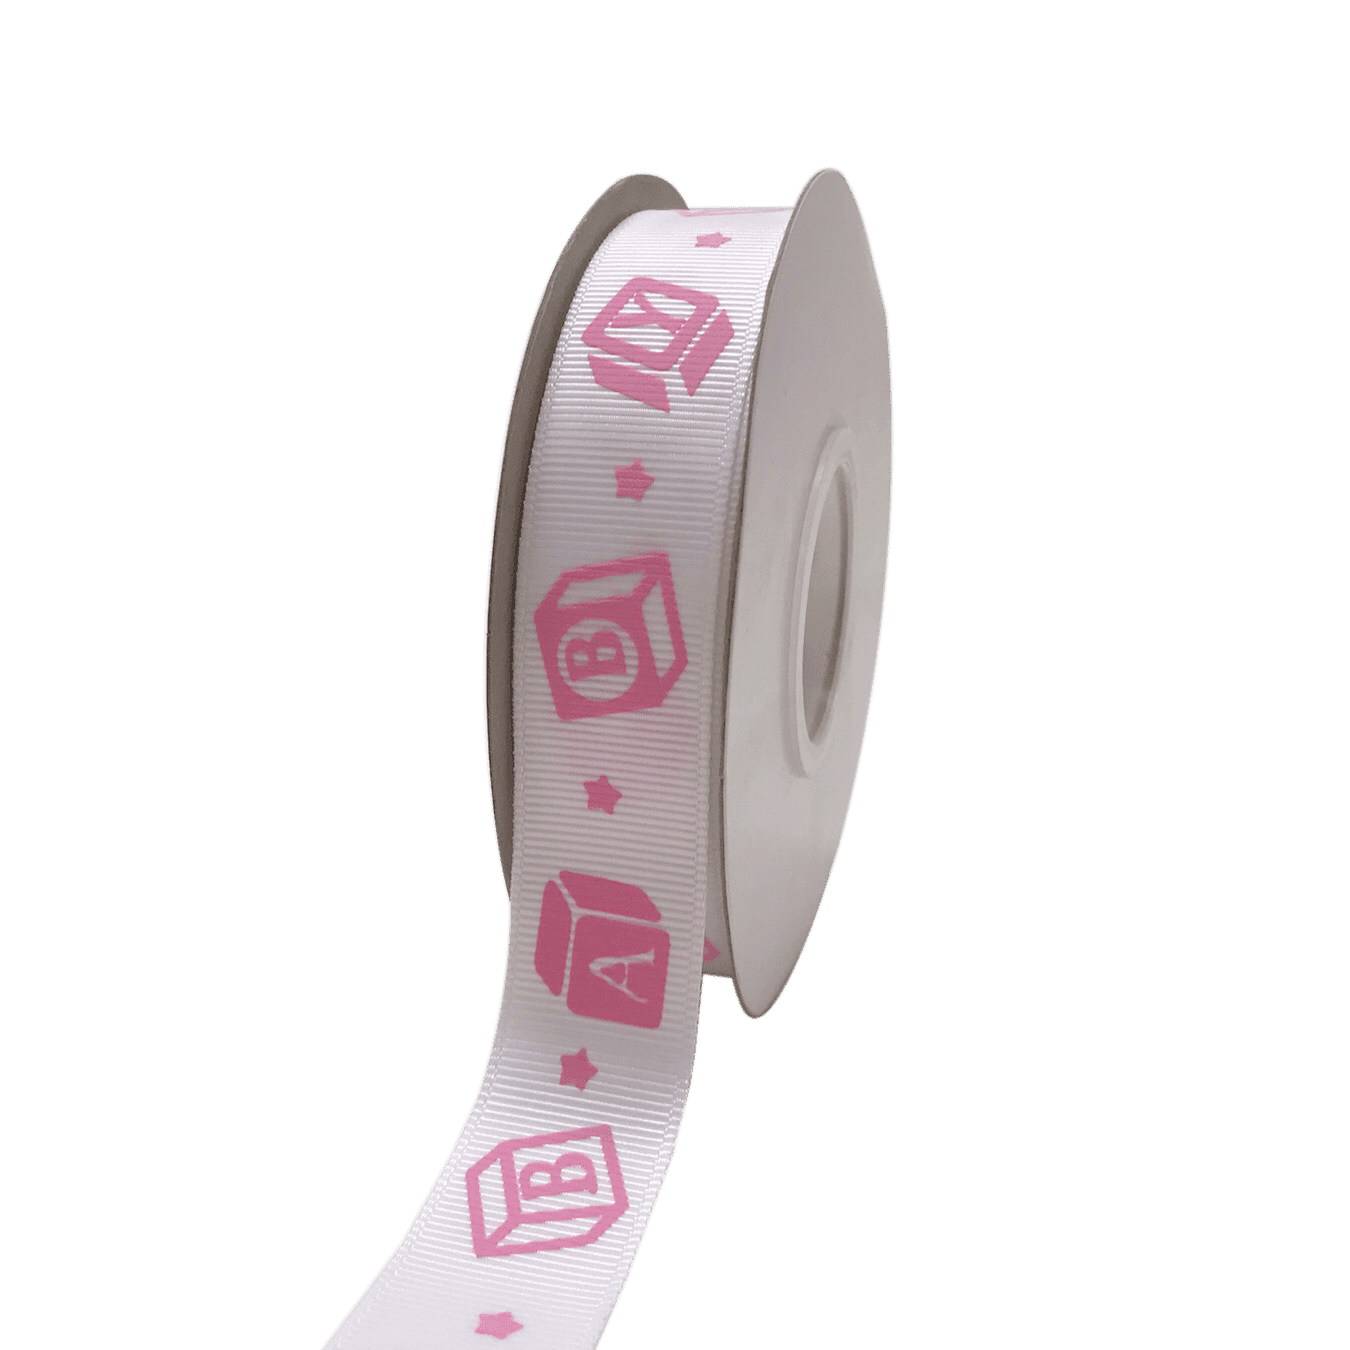 Grosgrain Ribbon Baby Design Pink Baby Face ( Width: 3/8 inch